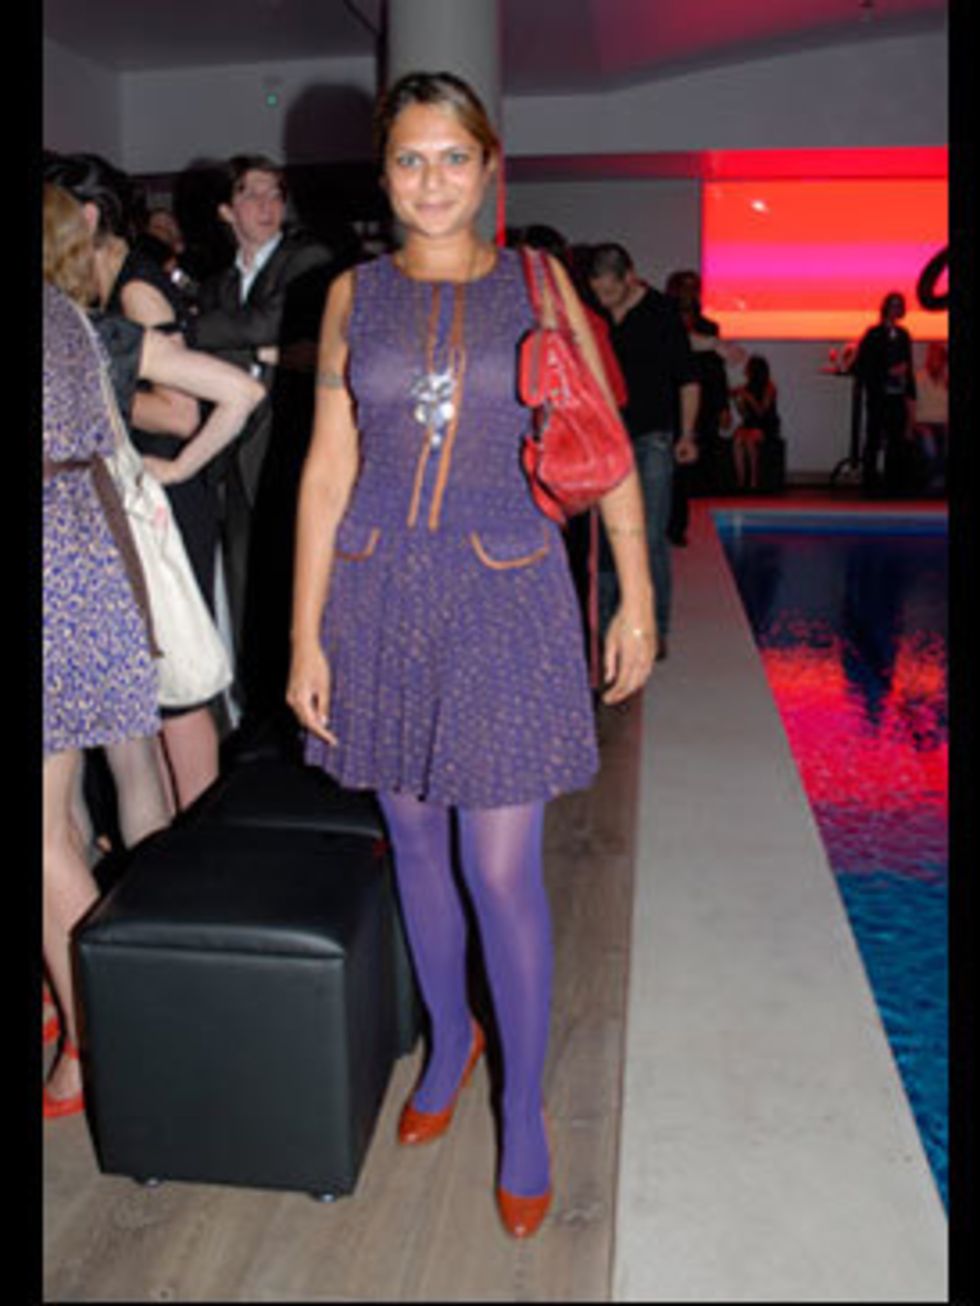 <p>Yet another purple dress/red shoe combo. The dress was from a little boutique in New York, while her eye-catching bag is by Balenciaga. The purple tights and red bag make this a daring combination.</p>